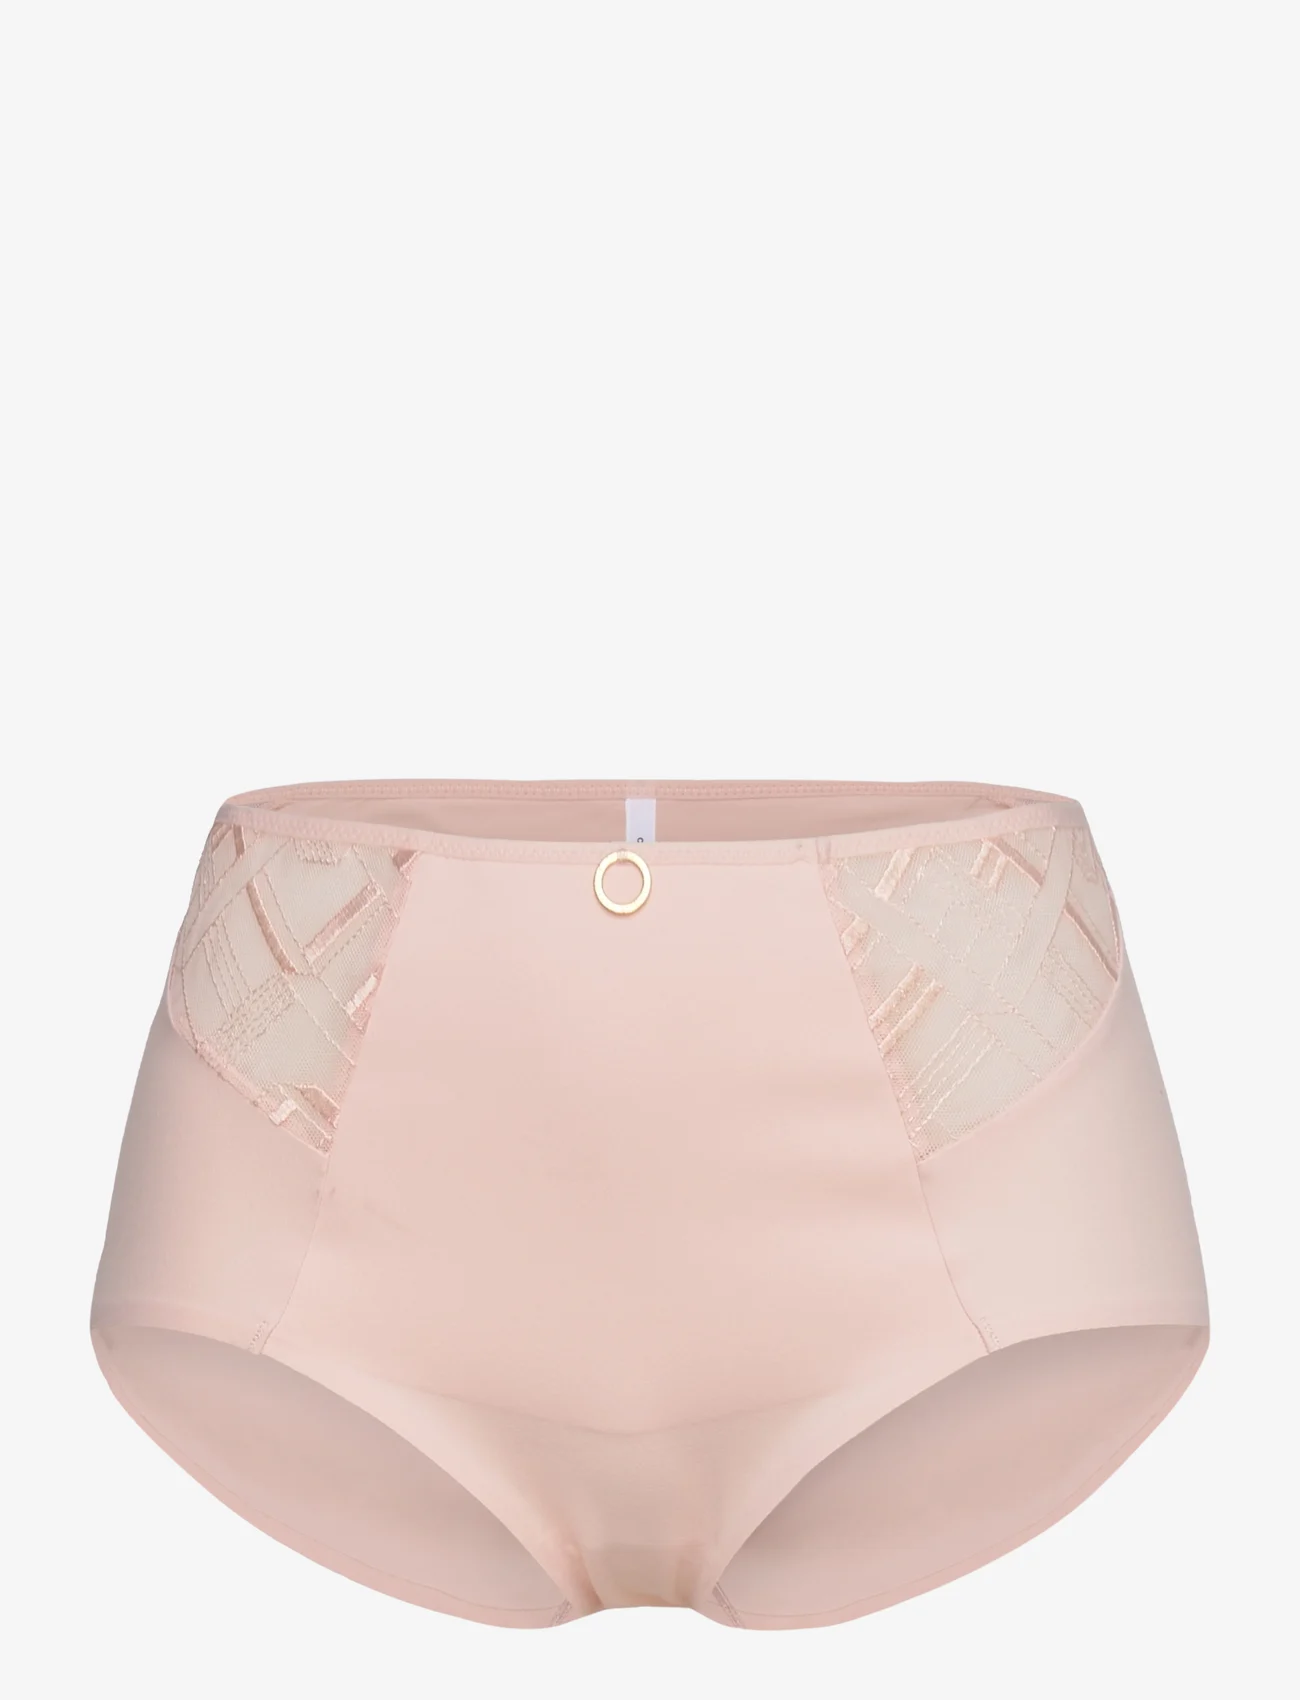 CHANTELLE - Graphic Support High Waisted Support Full Brief - plus size - taffeta pink - 0